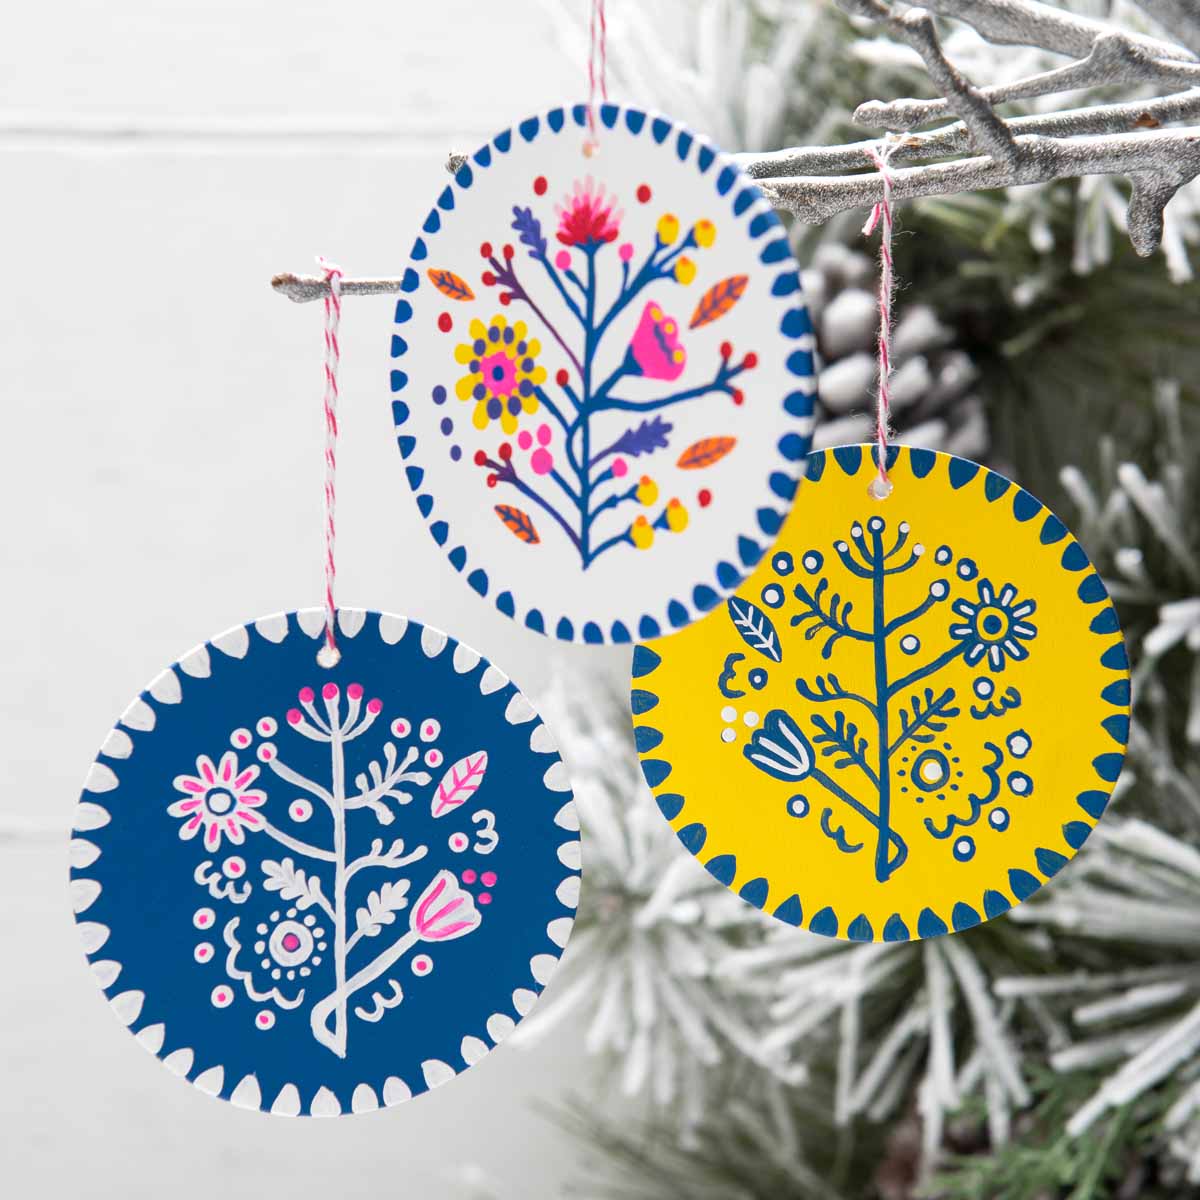 https://plaidonline.com/getattachment/Projects/Hand-Painted-Nordic-Ornaments/00POL_XMAS_bty_Ornaments_13_101719.jpg;